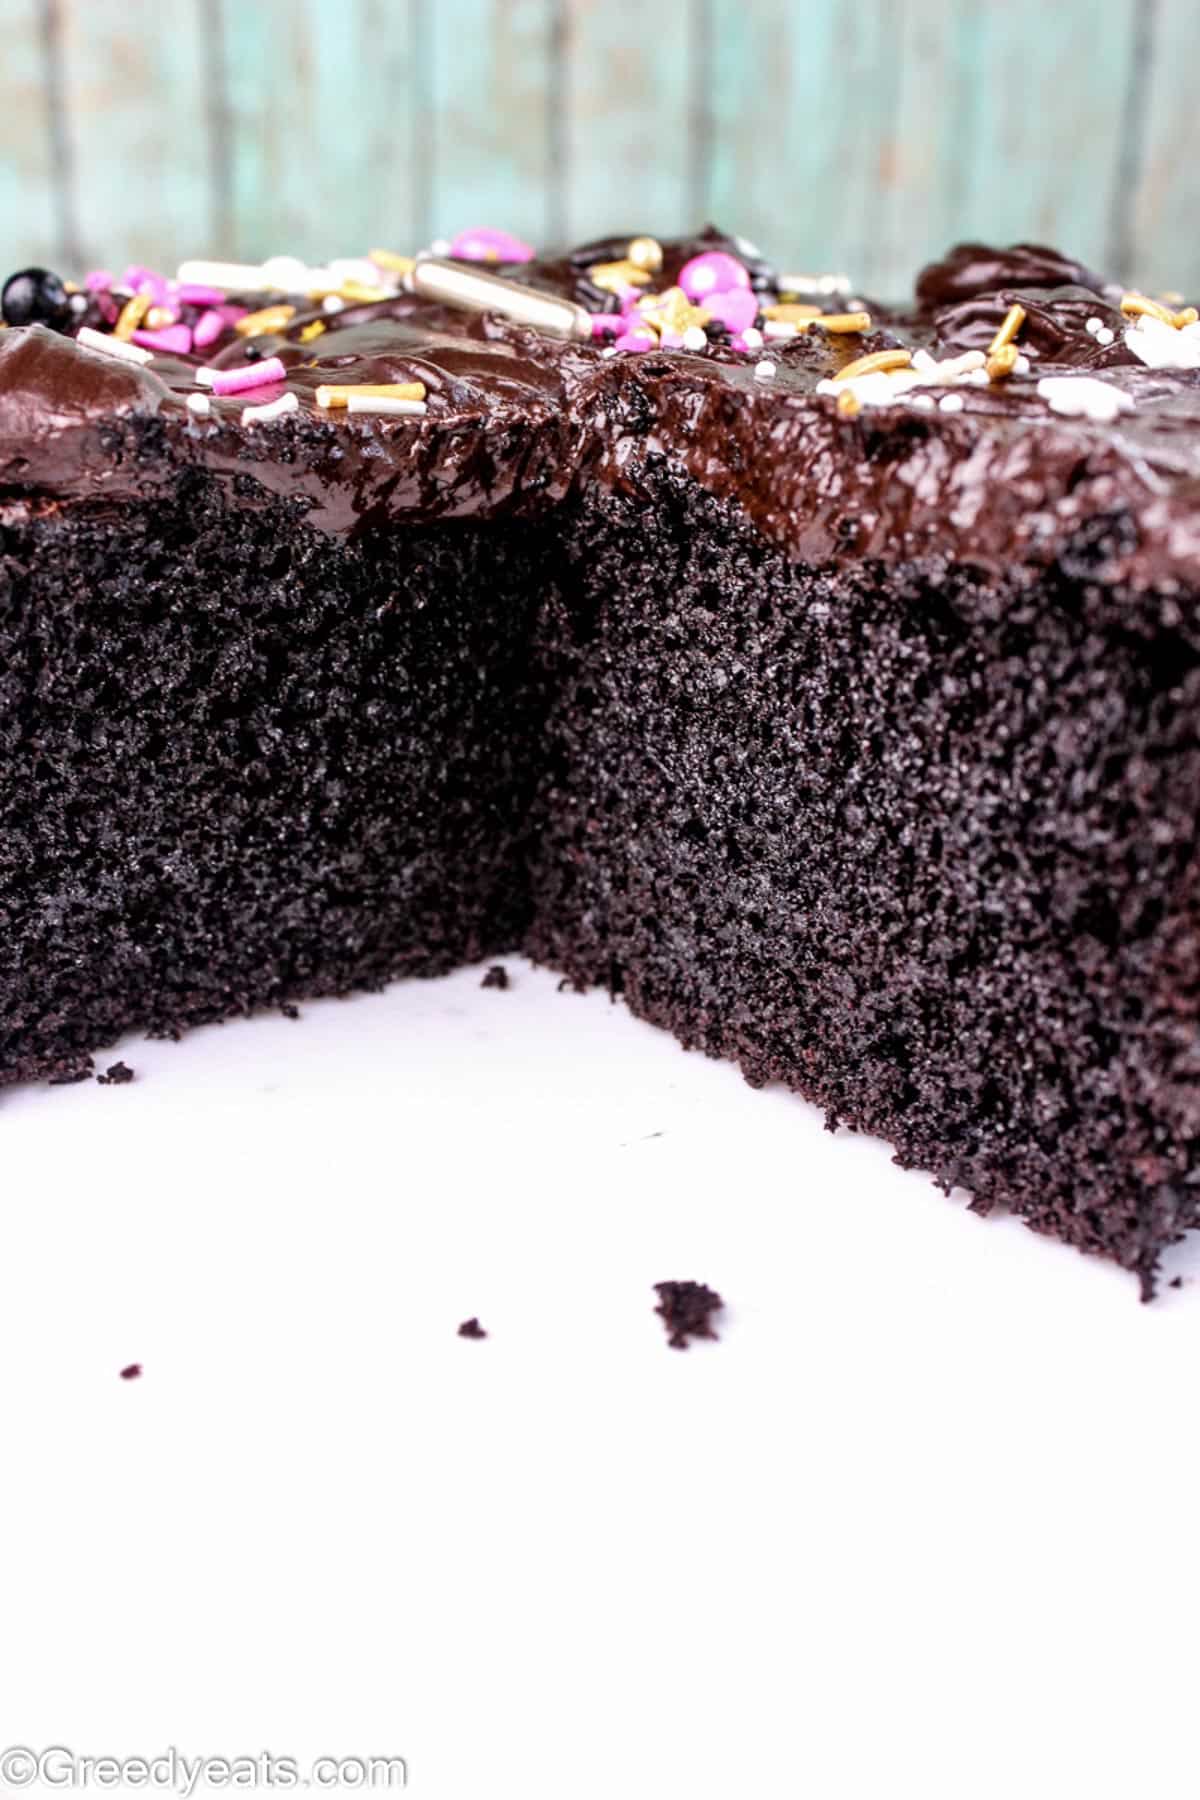 A rich, fluffy and moist chocolate cake with ganache and sprinkles, kept on a white board.